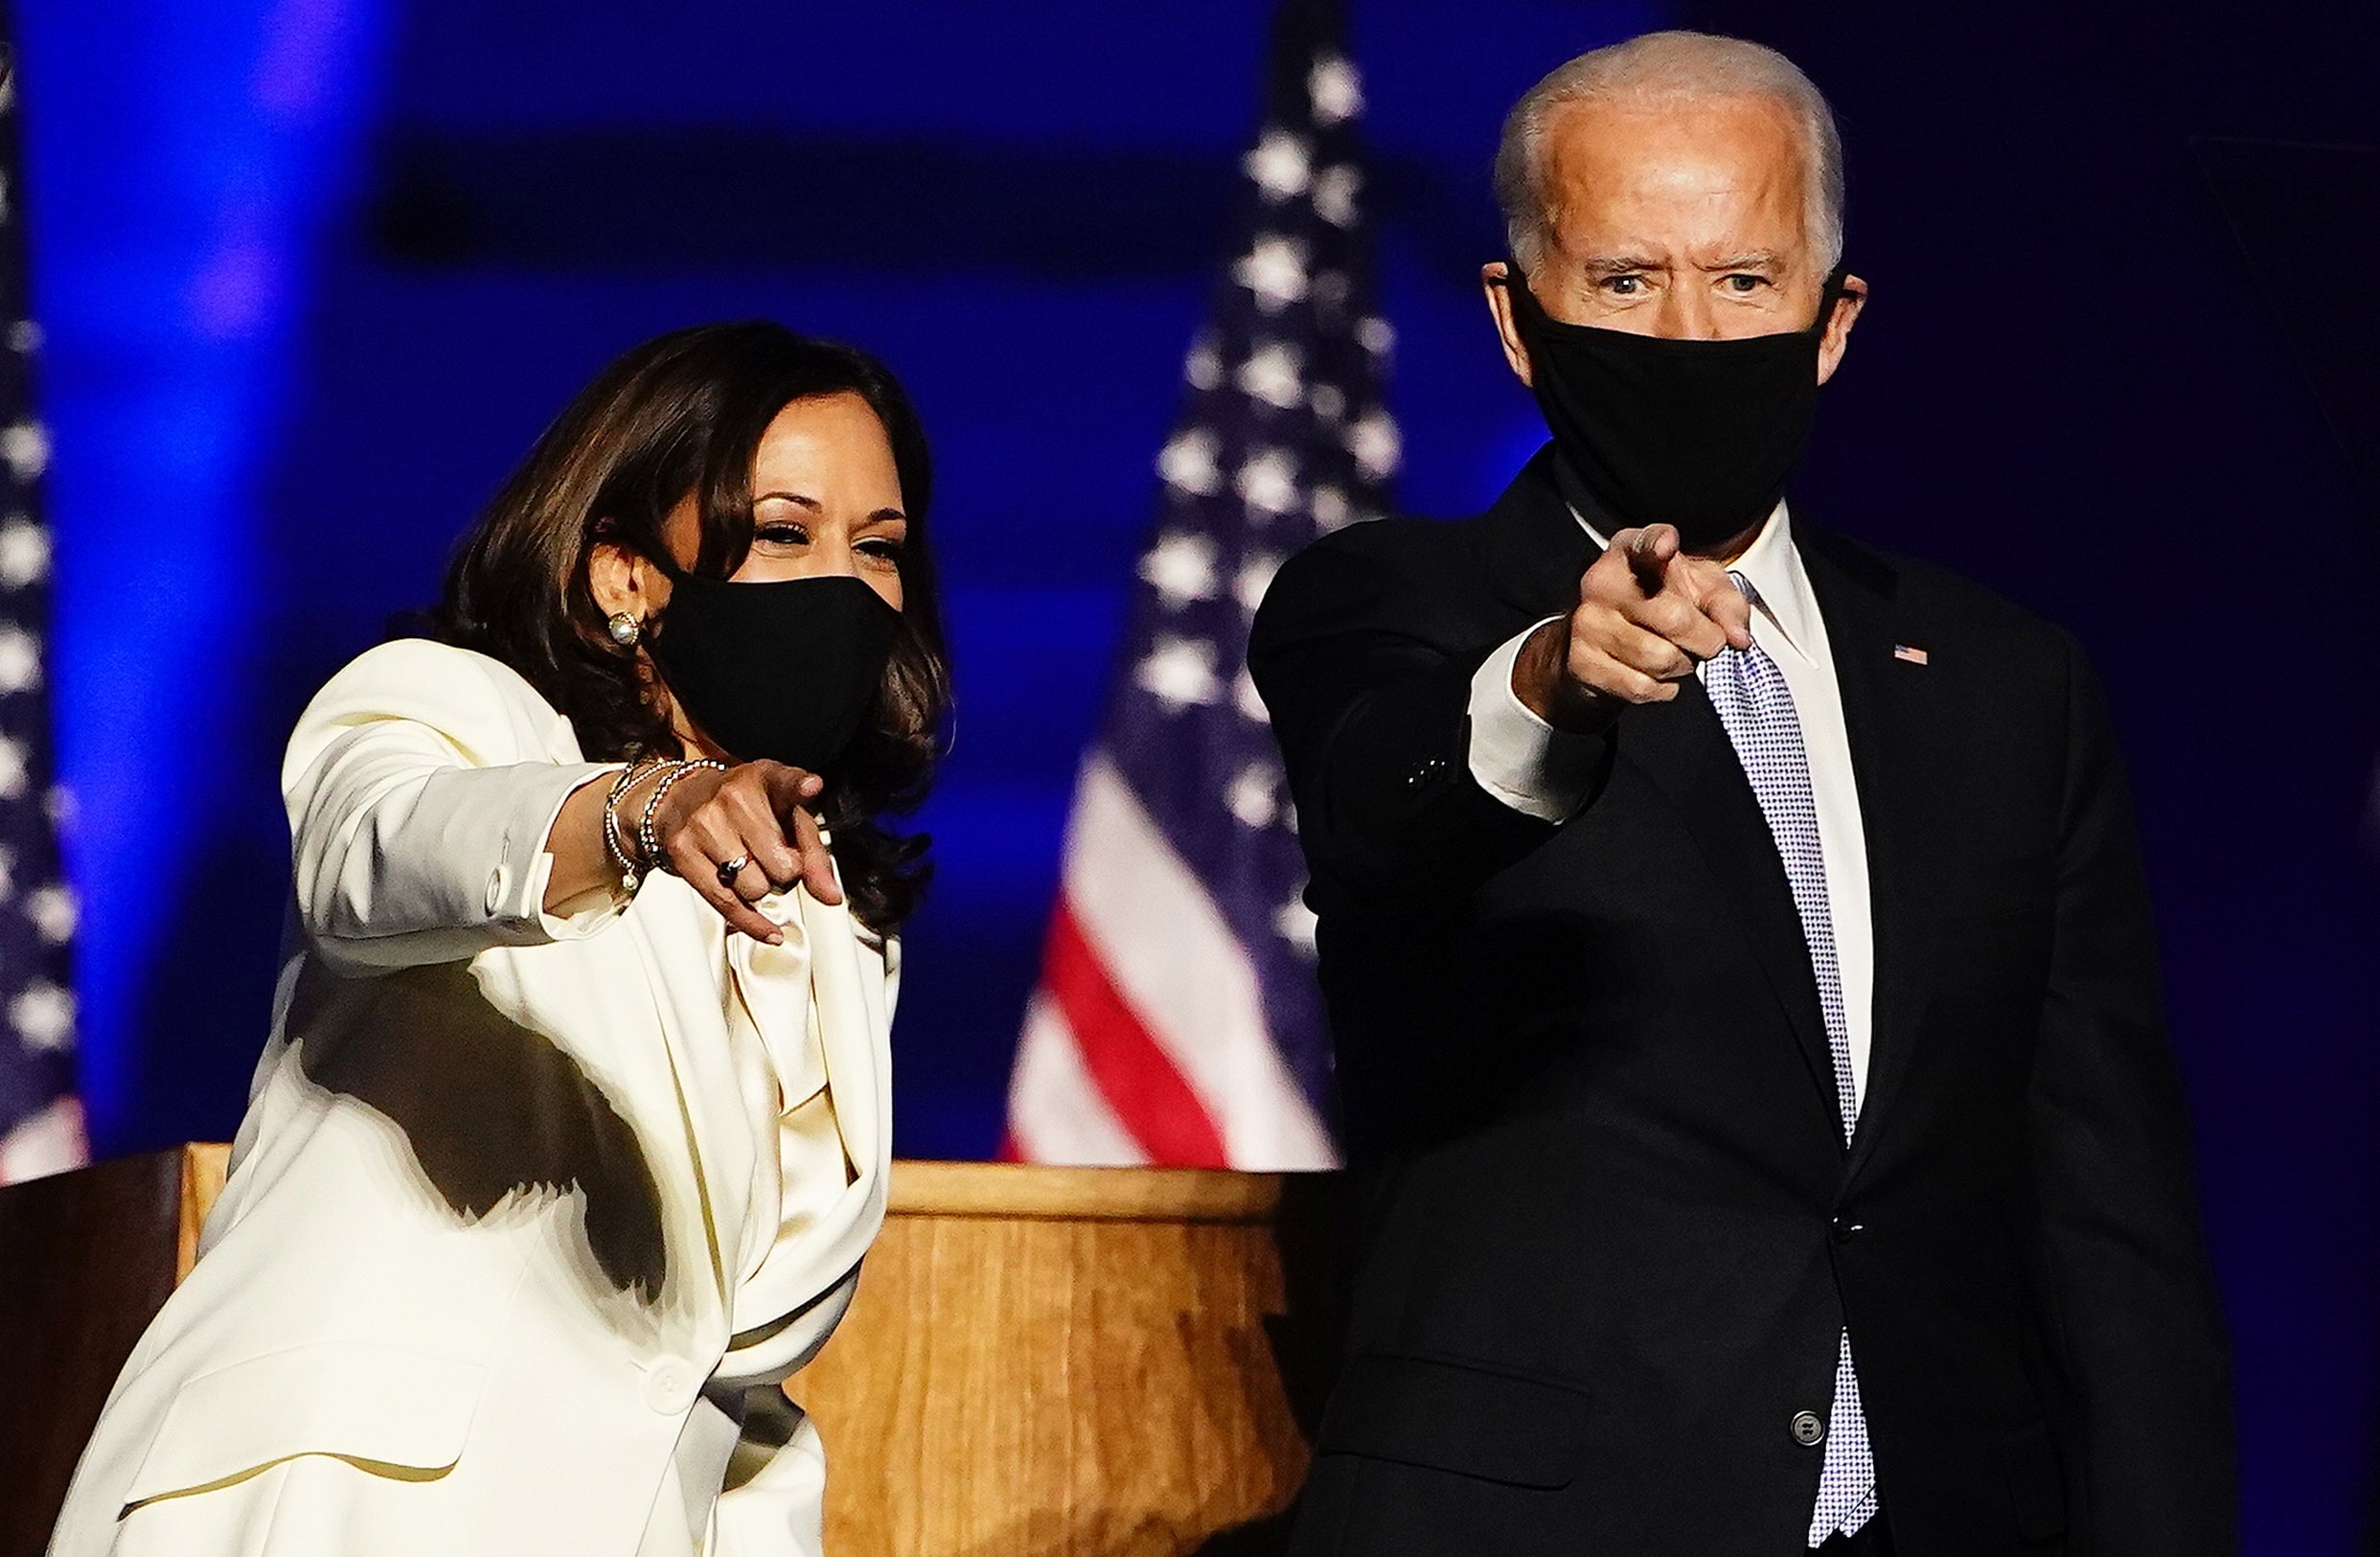 Biden and Harris will officially become president and vice president on January 20th